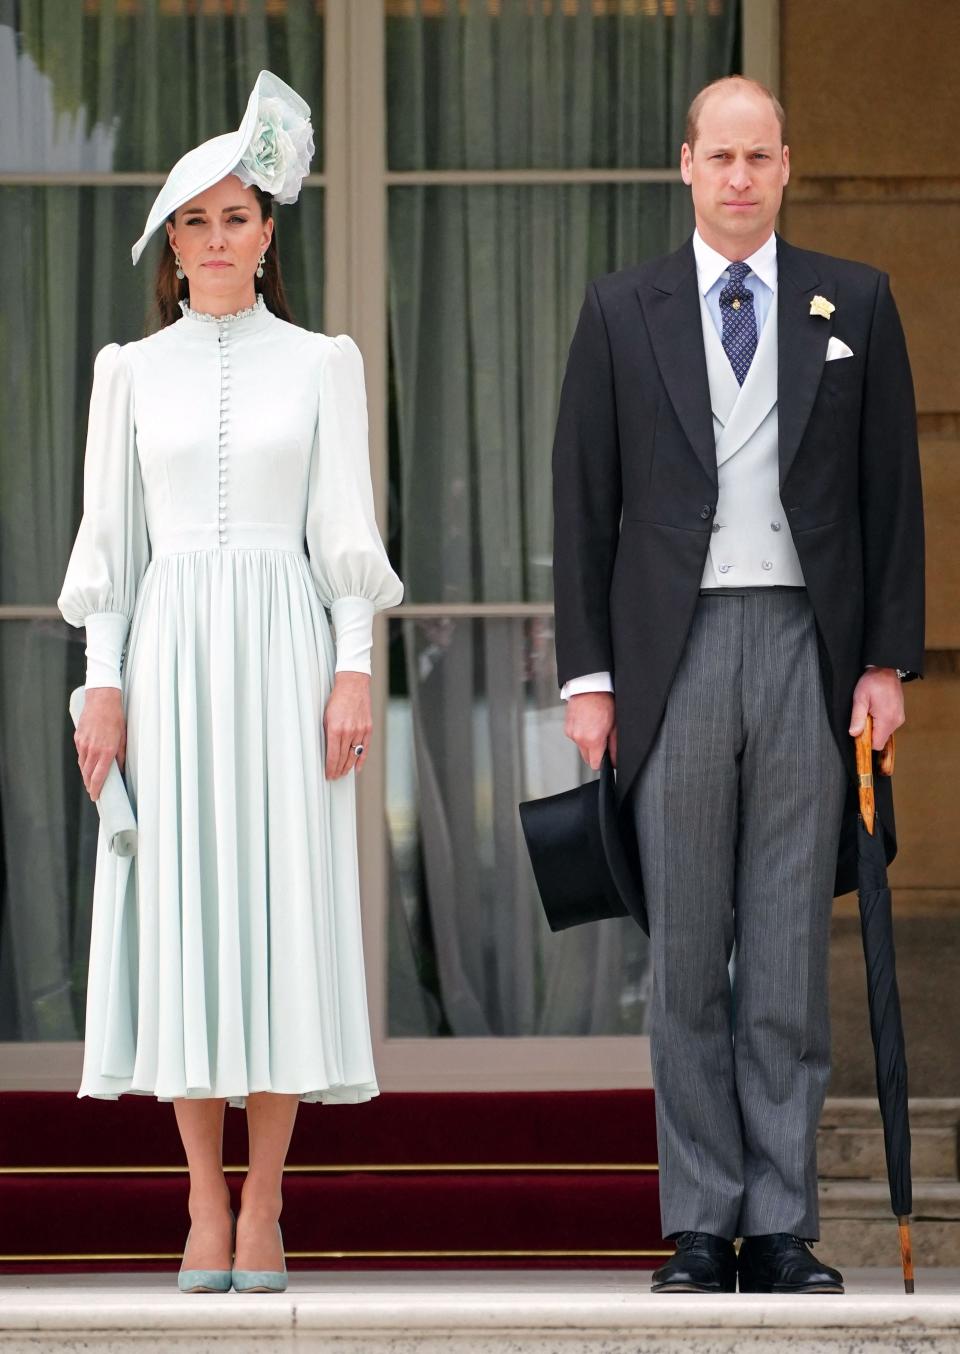 Duchess Kate and Prince William stand at attention for the national anthem before plunging into the crowd at the latest royal Garden Party at Buckingham Palace on May 25, 2022. After Queen Elizabeth's death, Prince Charles has named them the Prince and Princess of Wales.